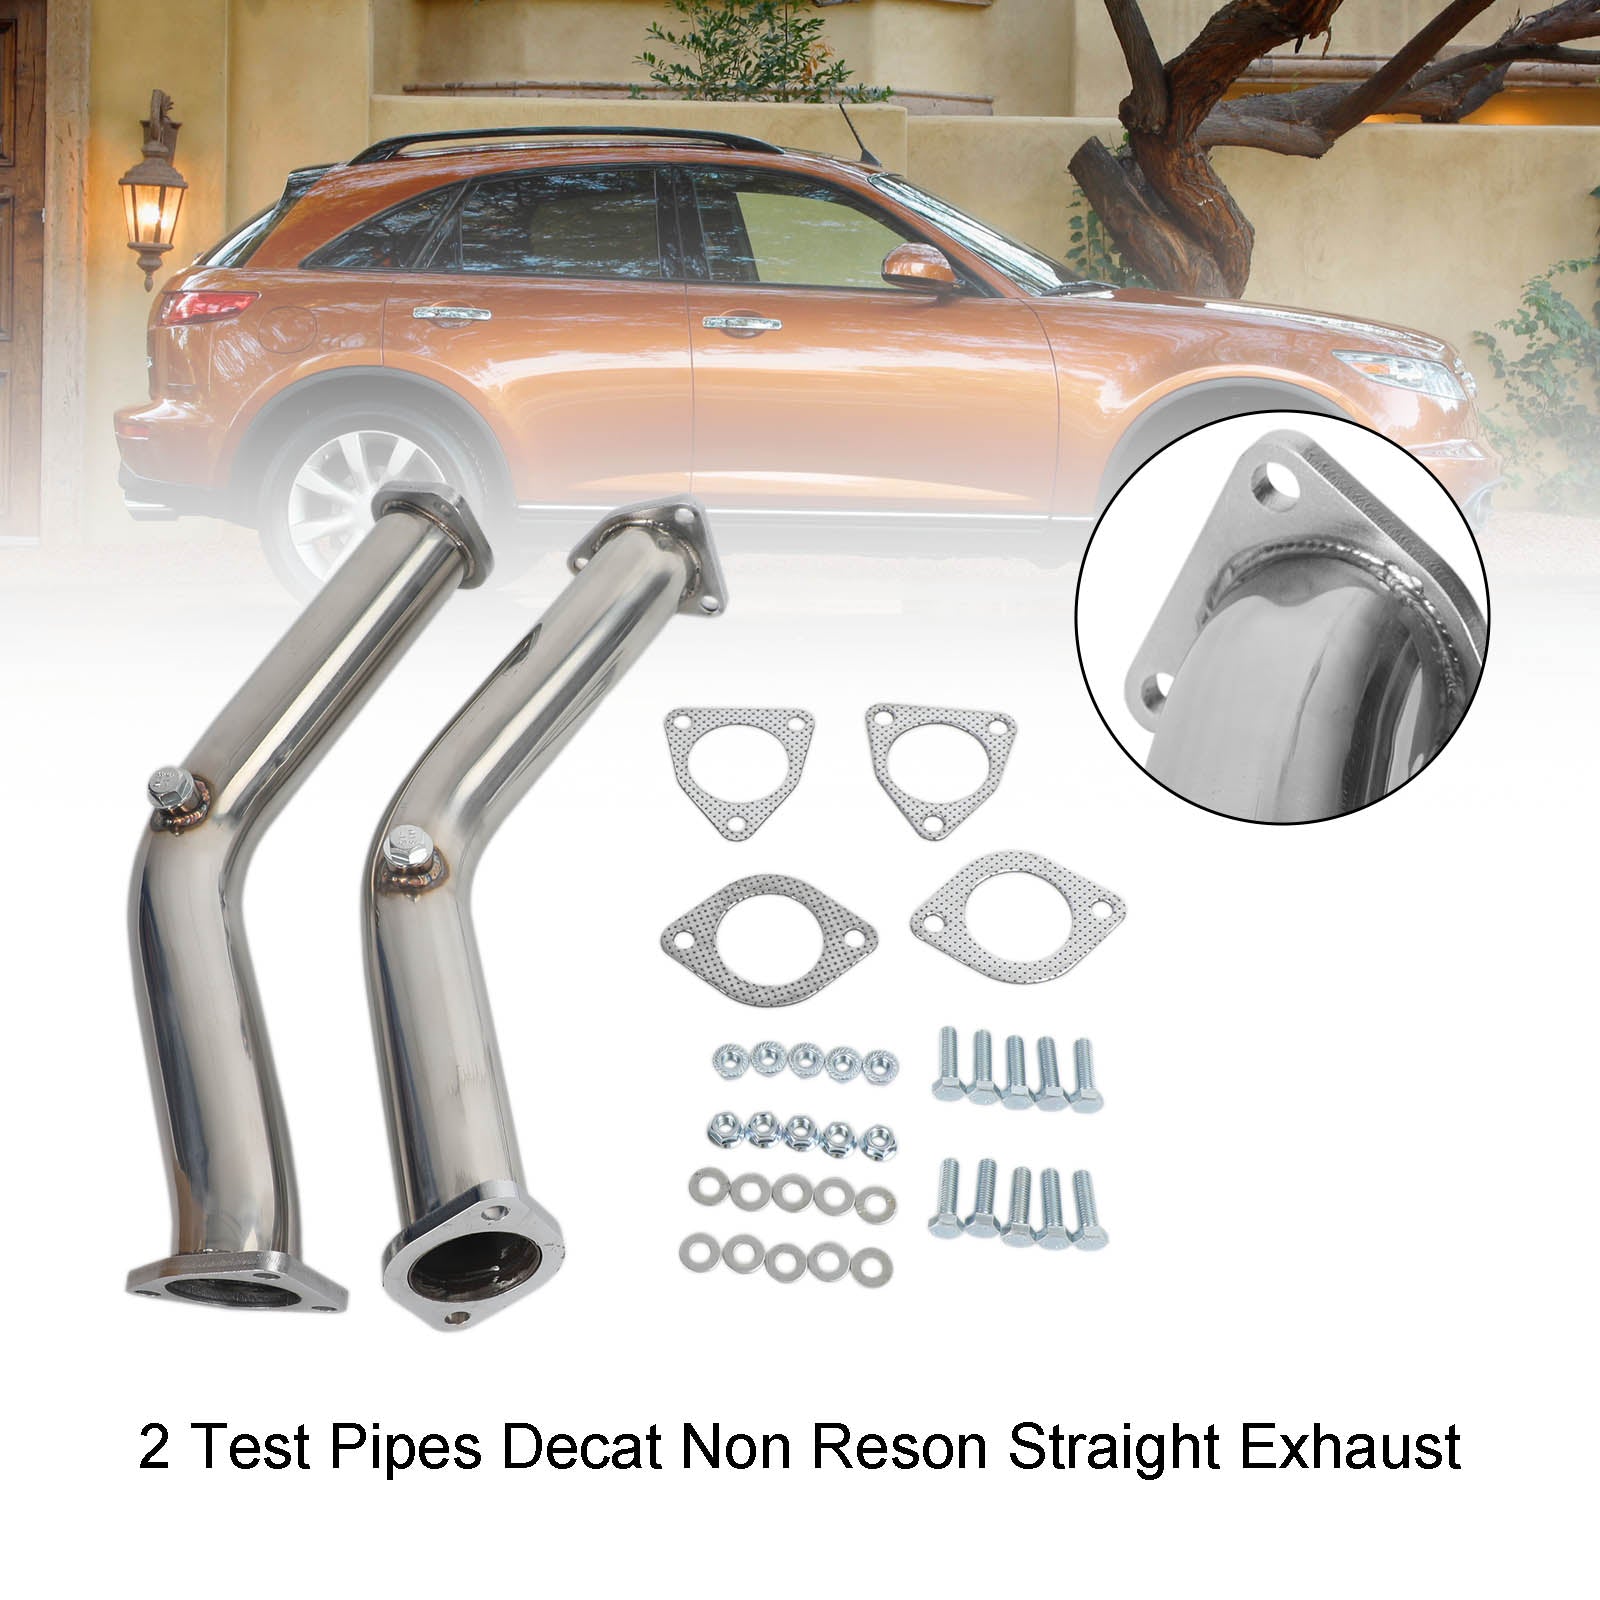 Infiniti 2003-2006 G35 FX35 Nissan 350Z 2 Test Pipes Decat Non Reson Straight Exhaust